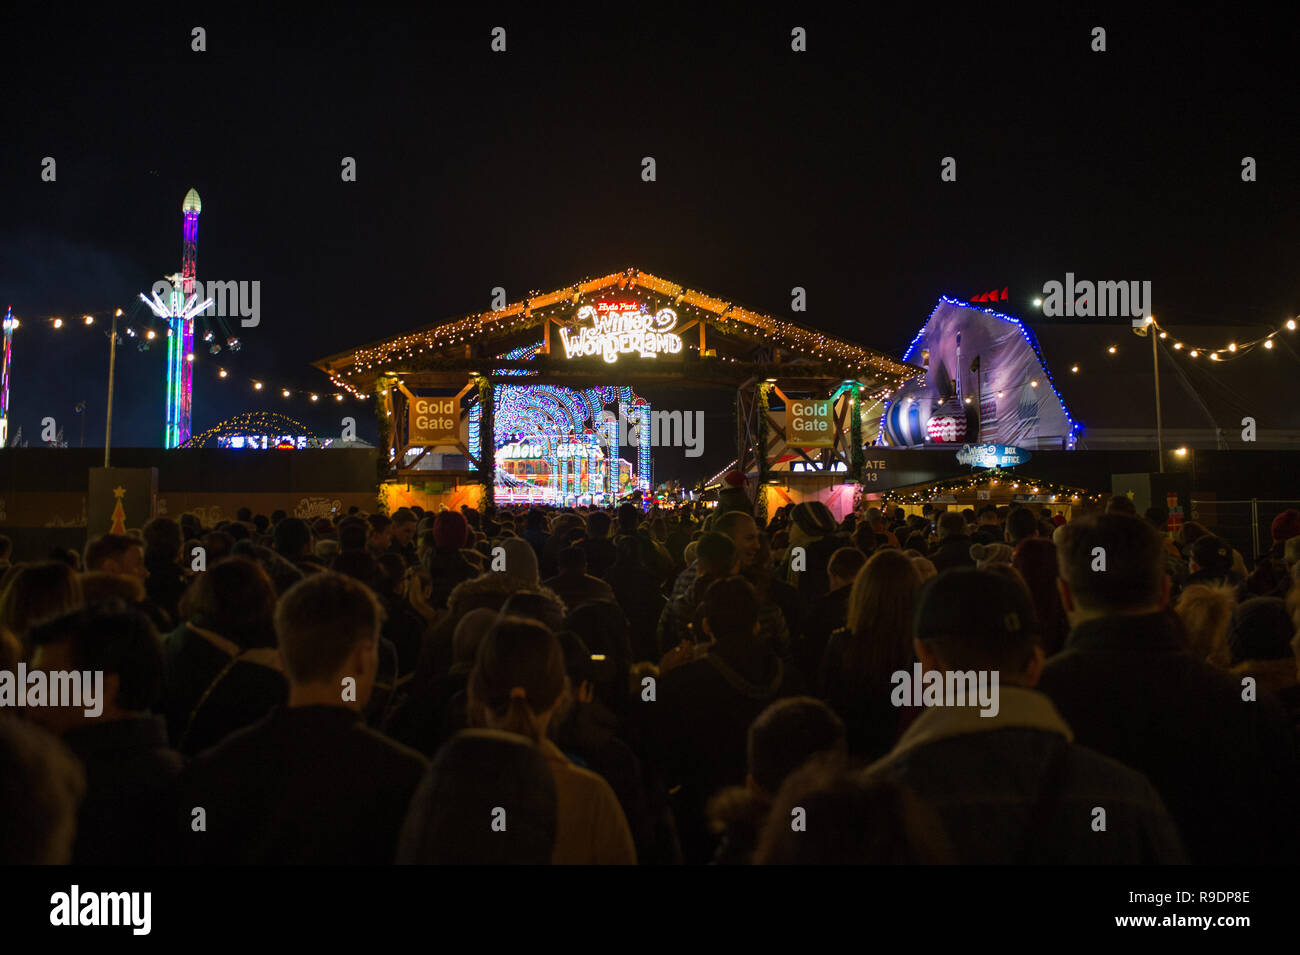 London, UK.22nd December , 2018 Large crowds at the christmas Winter Wonderland in Hyde Park Central London. the Winter Wonderland as a variety of different attractions. There was a long queue at the main gate due to security bag searches. Andrew Steven Graham/Alamy Live News Stock Photo